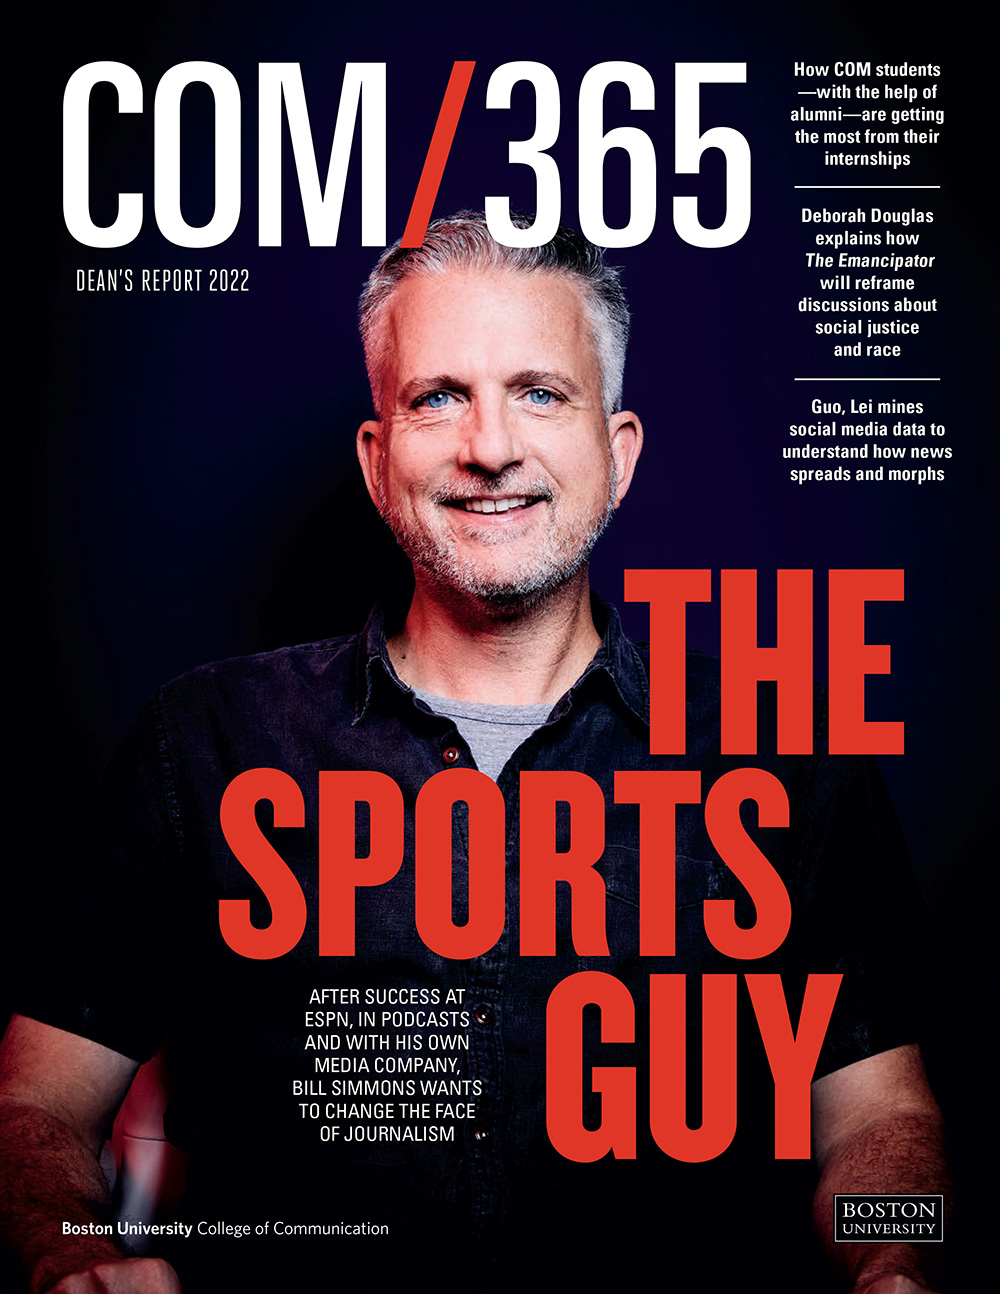 Bill Simmons, sports analyst, author & podcaster / COM/365